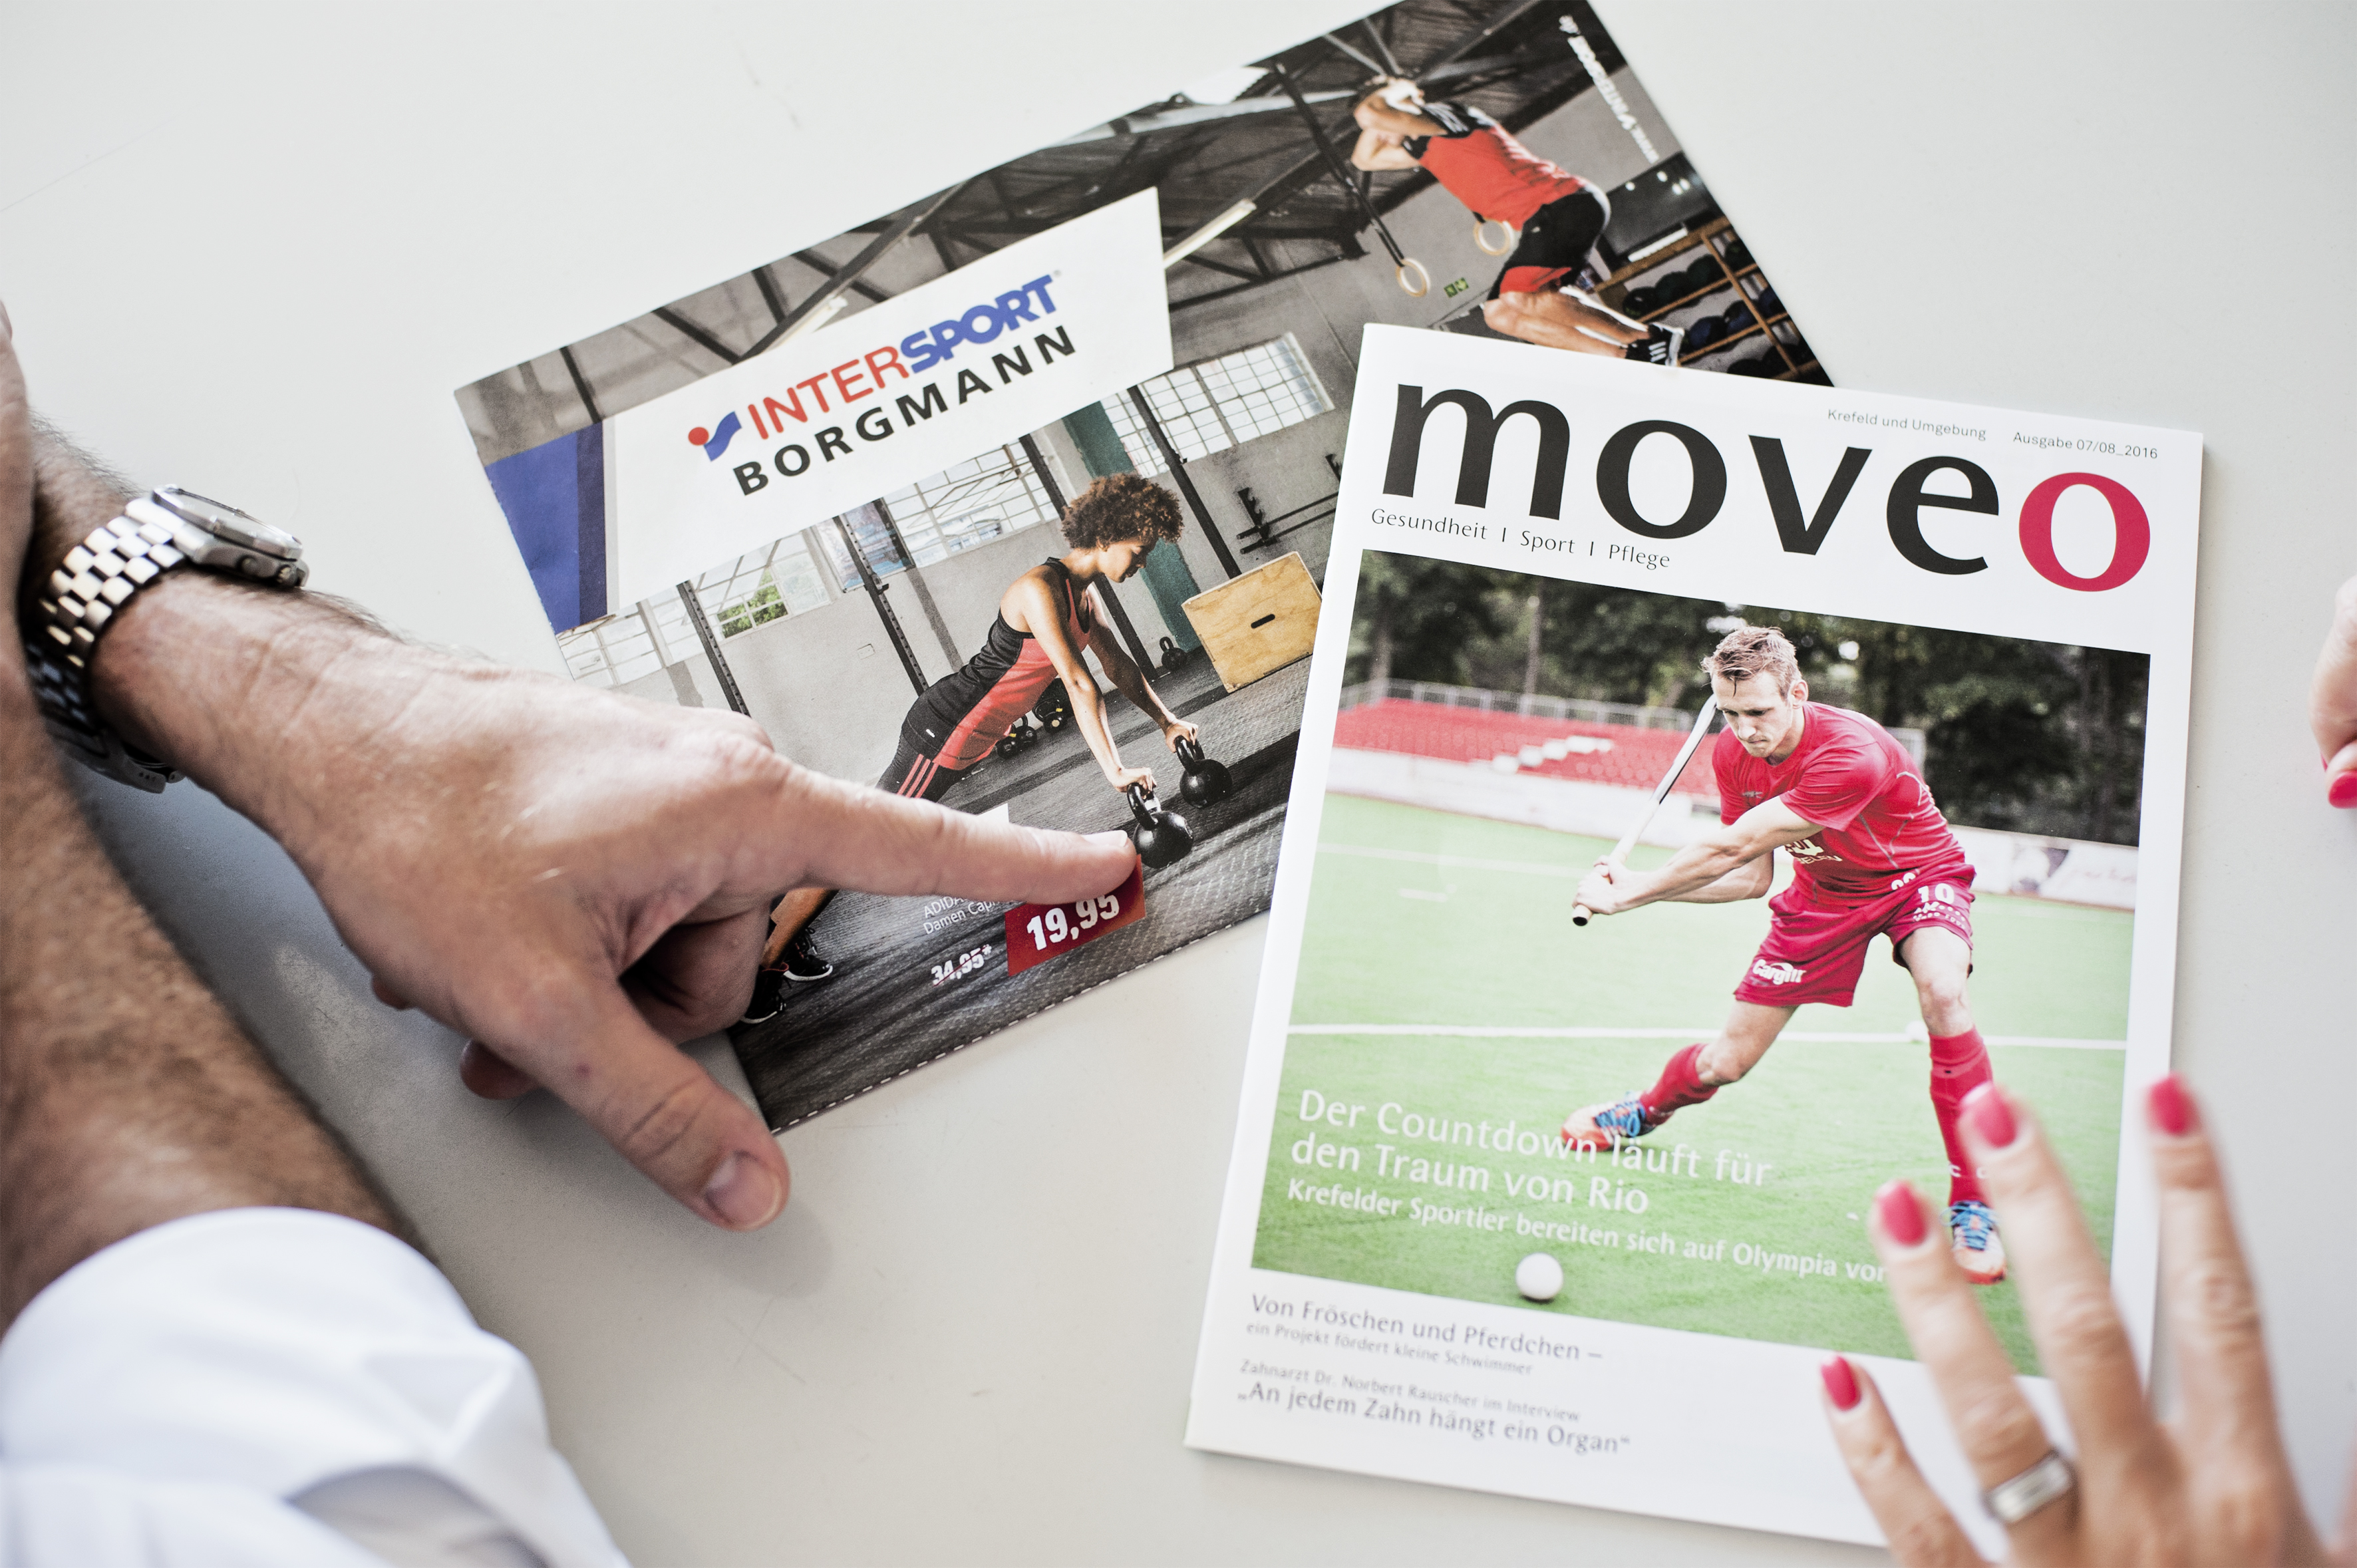 moveos mind a move-day powerd by Intersport Borgman